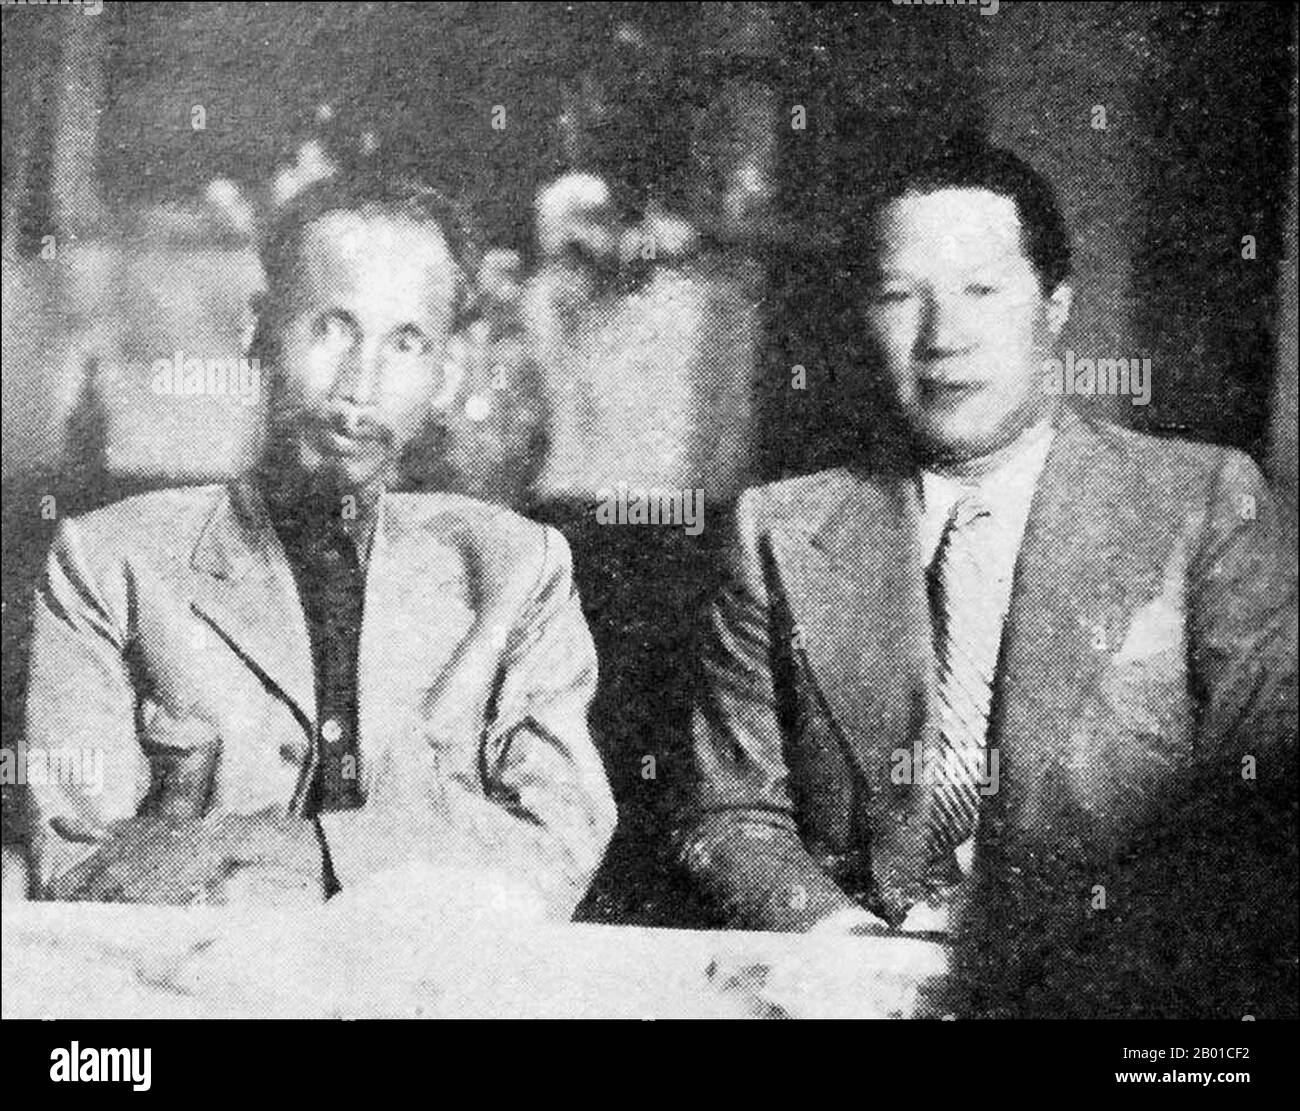 Vietnam: Former Emperor Bao Dai (22 October 1913 - 31 July 1997), shortly after abdicating in 1945 in favour of the Viet Minh, sitting with Ho Chi Minh as a 'simple citizen' and the supreme advisor of the Democratic Republic Of Vietnam. Photo by T. Do Khac, 1 June 1946.  Japan surrendered to the Allies in August 1945, and the Vietminh under the leadership of Hồ Chí Minh attempted to take power in a free Vietnam. Hồ was able to persuade Bao Dai to abdicate on 25 August 1945, handing power over to the Vietminh - an event which greatly enhanced Hồ's legitimacy in the eyes of the Vietnamese people Stock Photo